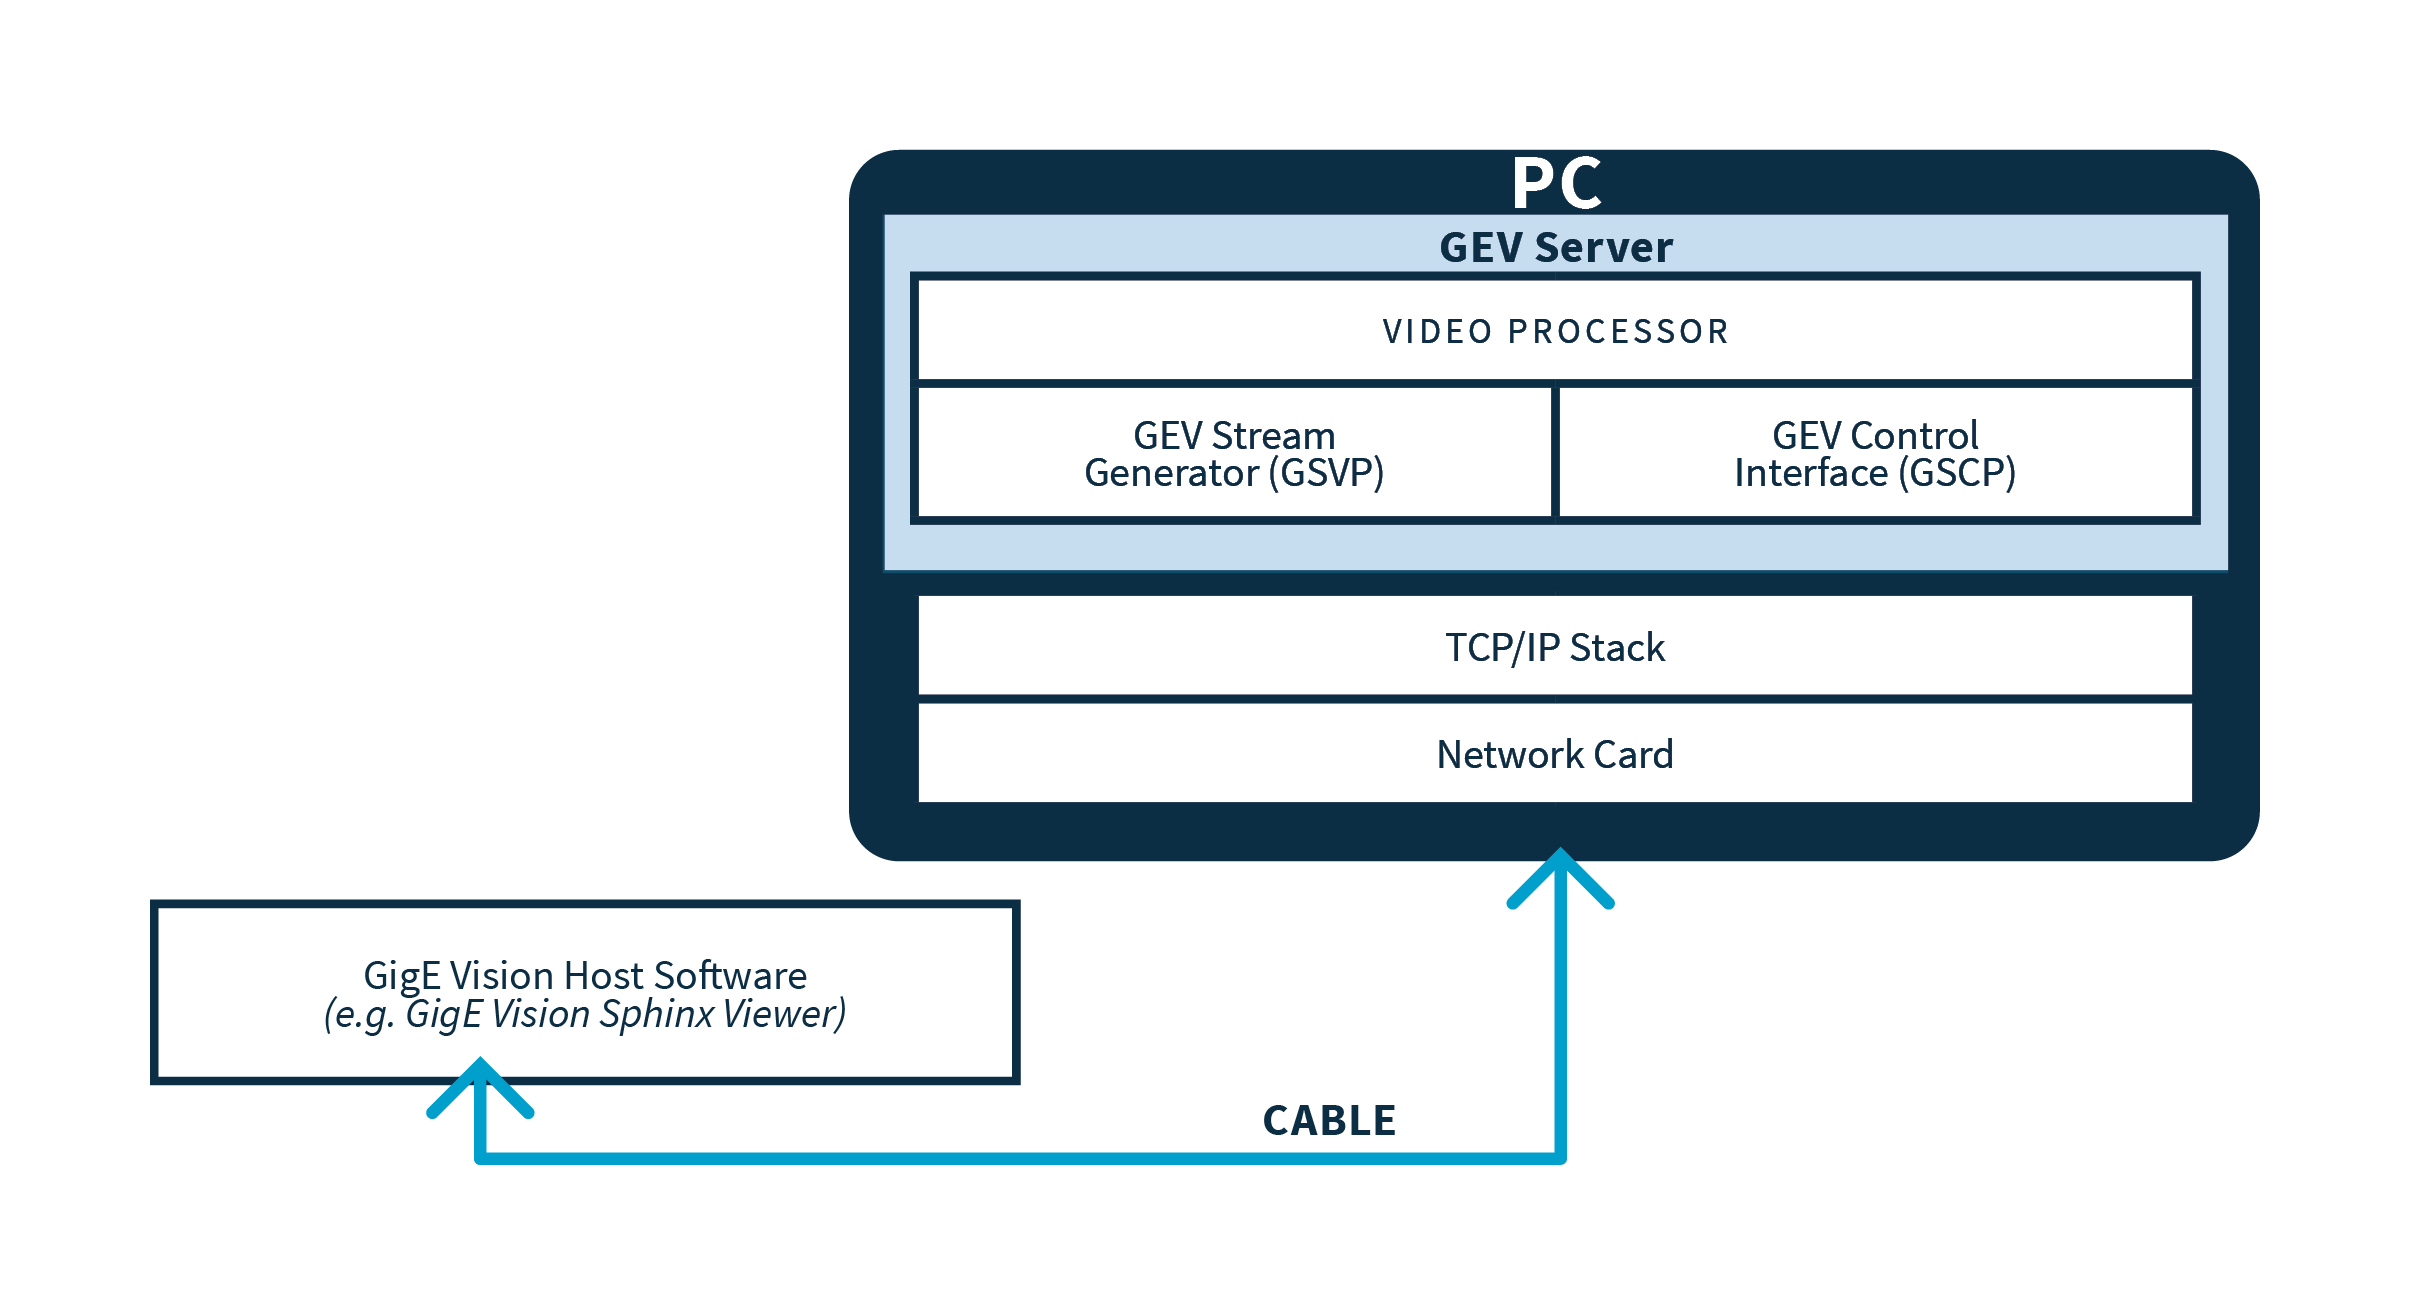 Structure of the GigE Vision Server